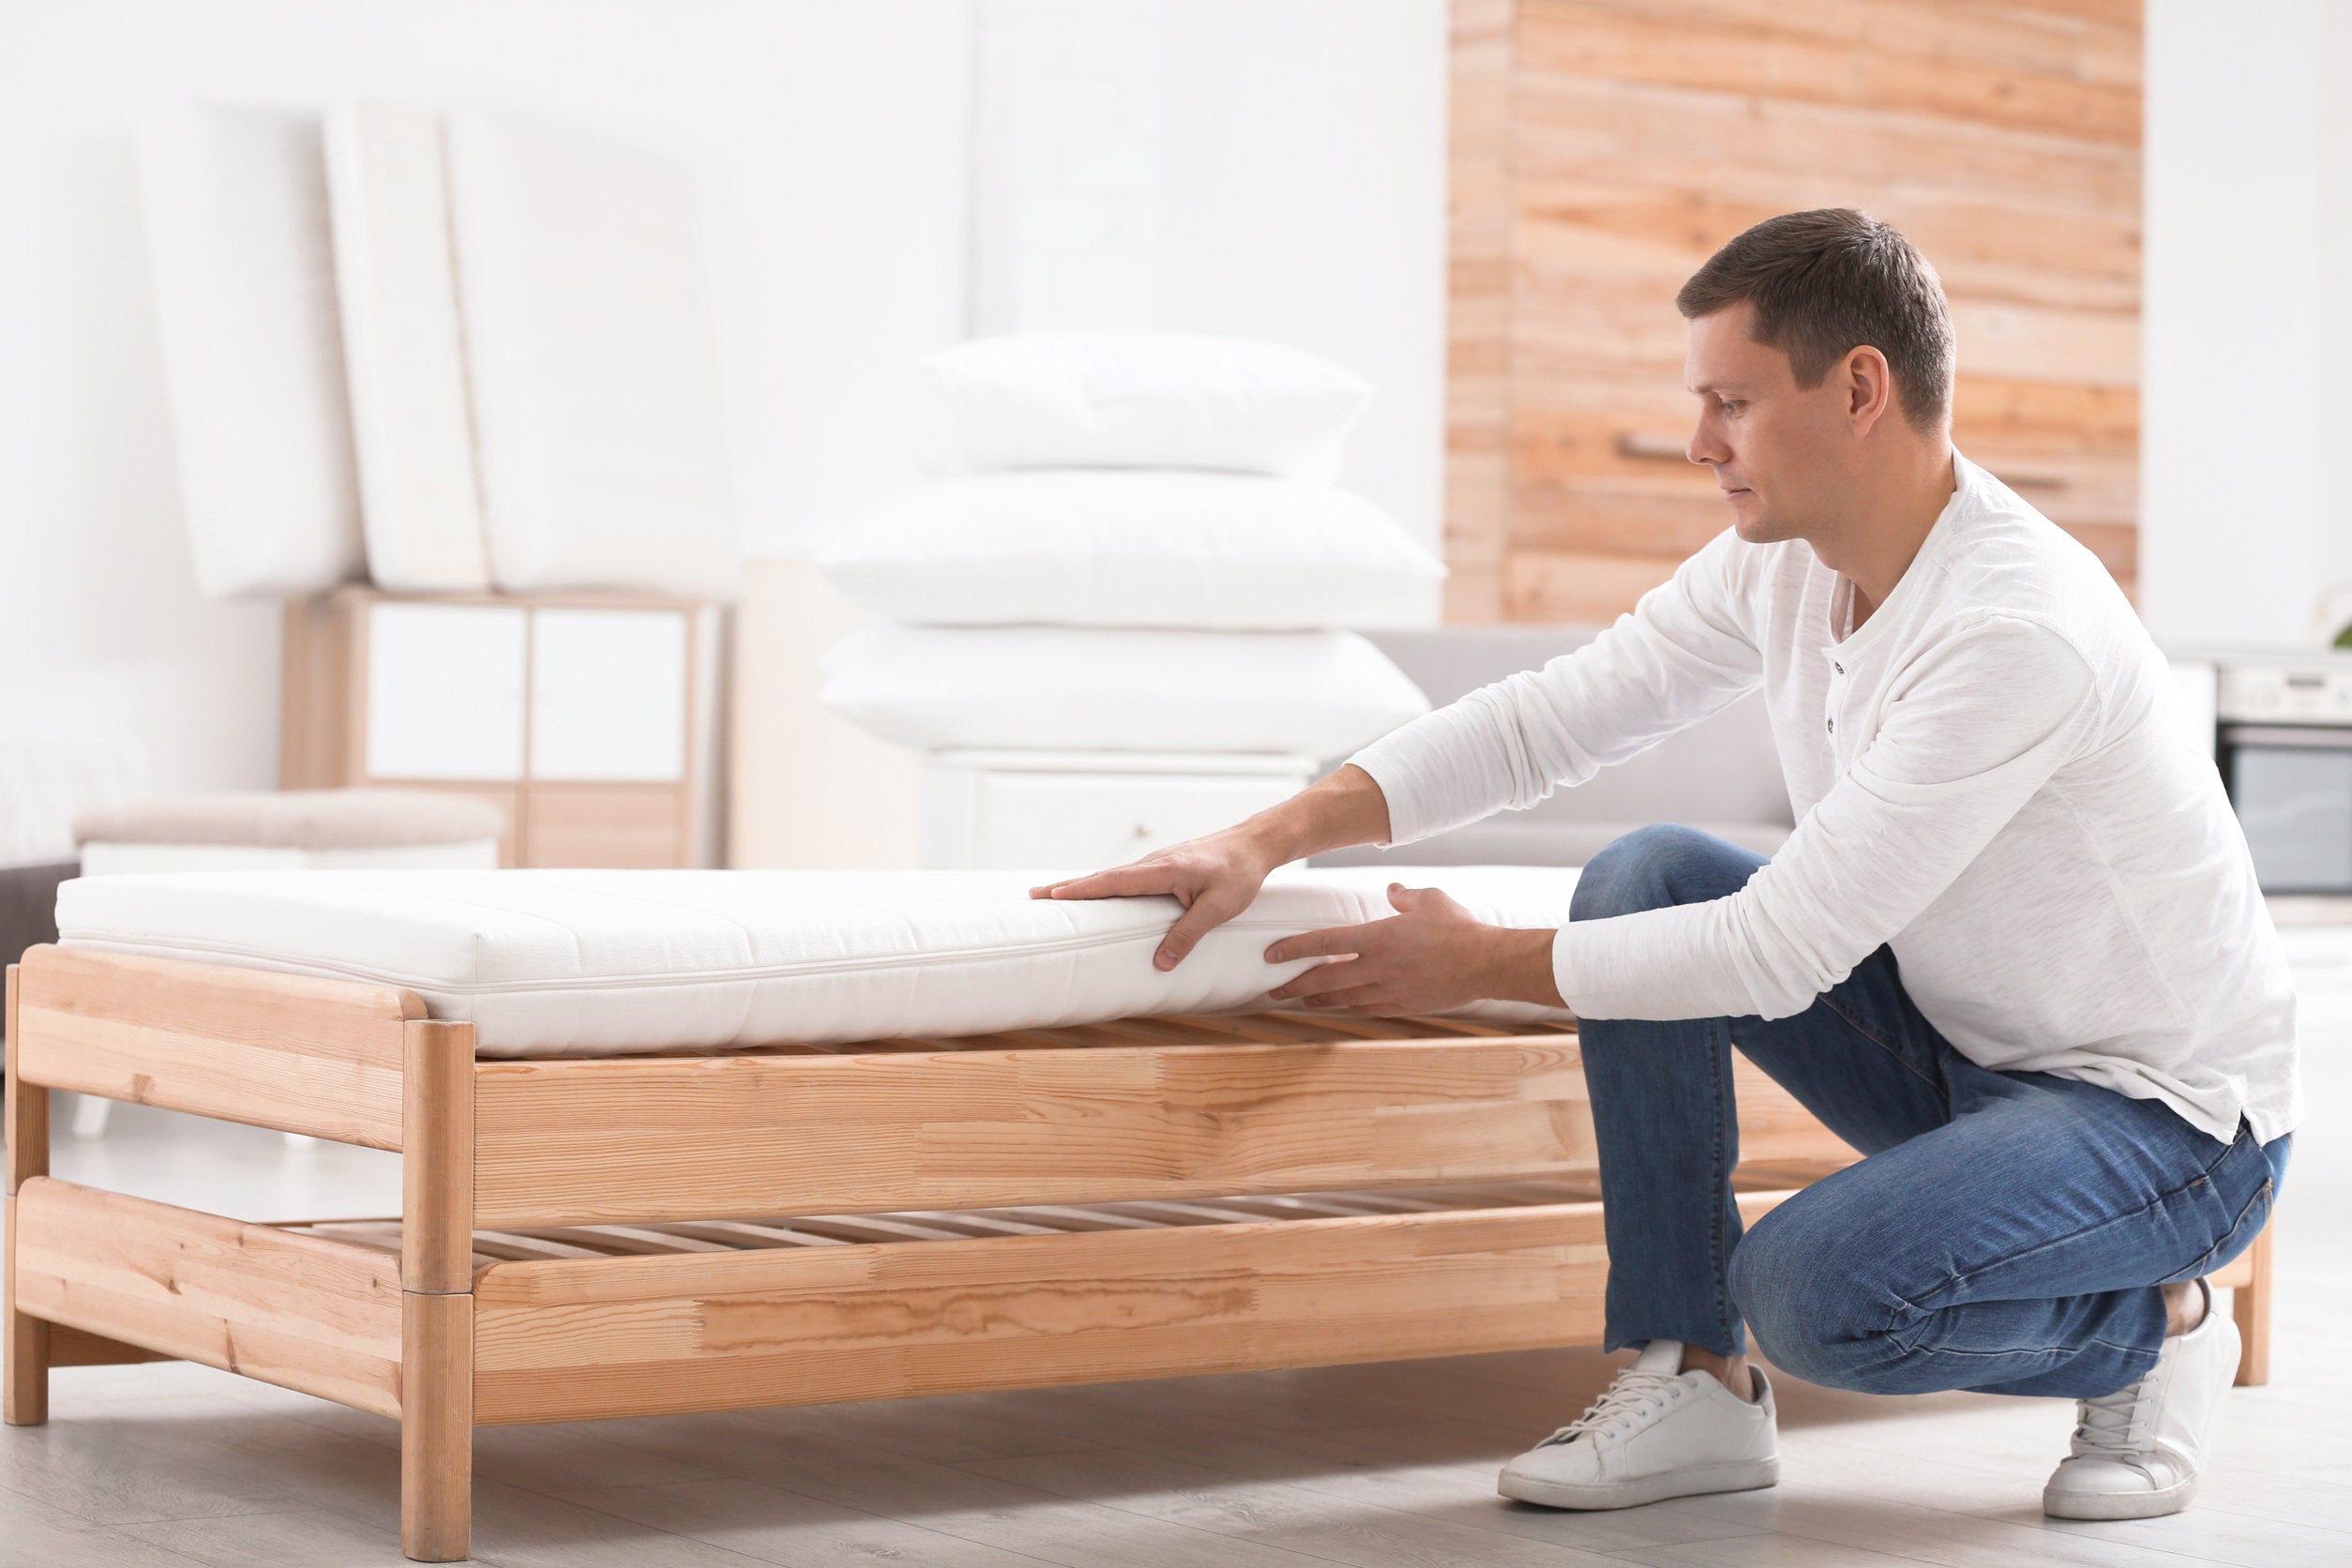 How Does Latex Compare to Air Mattresses? Understanding Different Sleep Surfaces